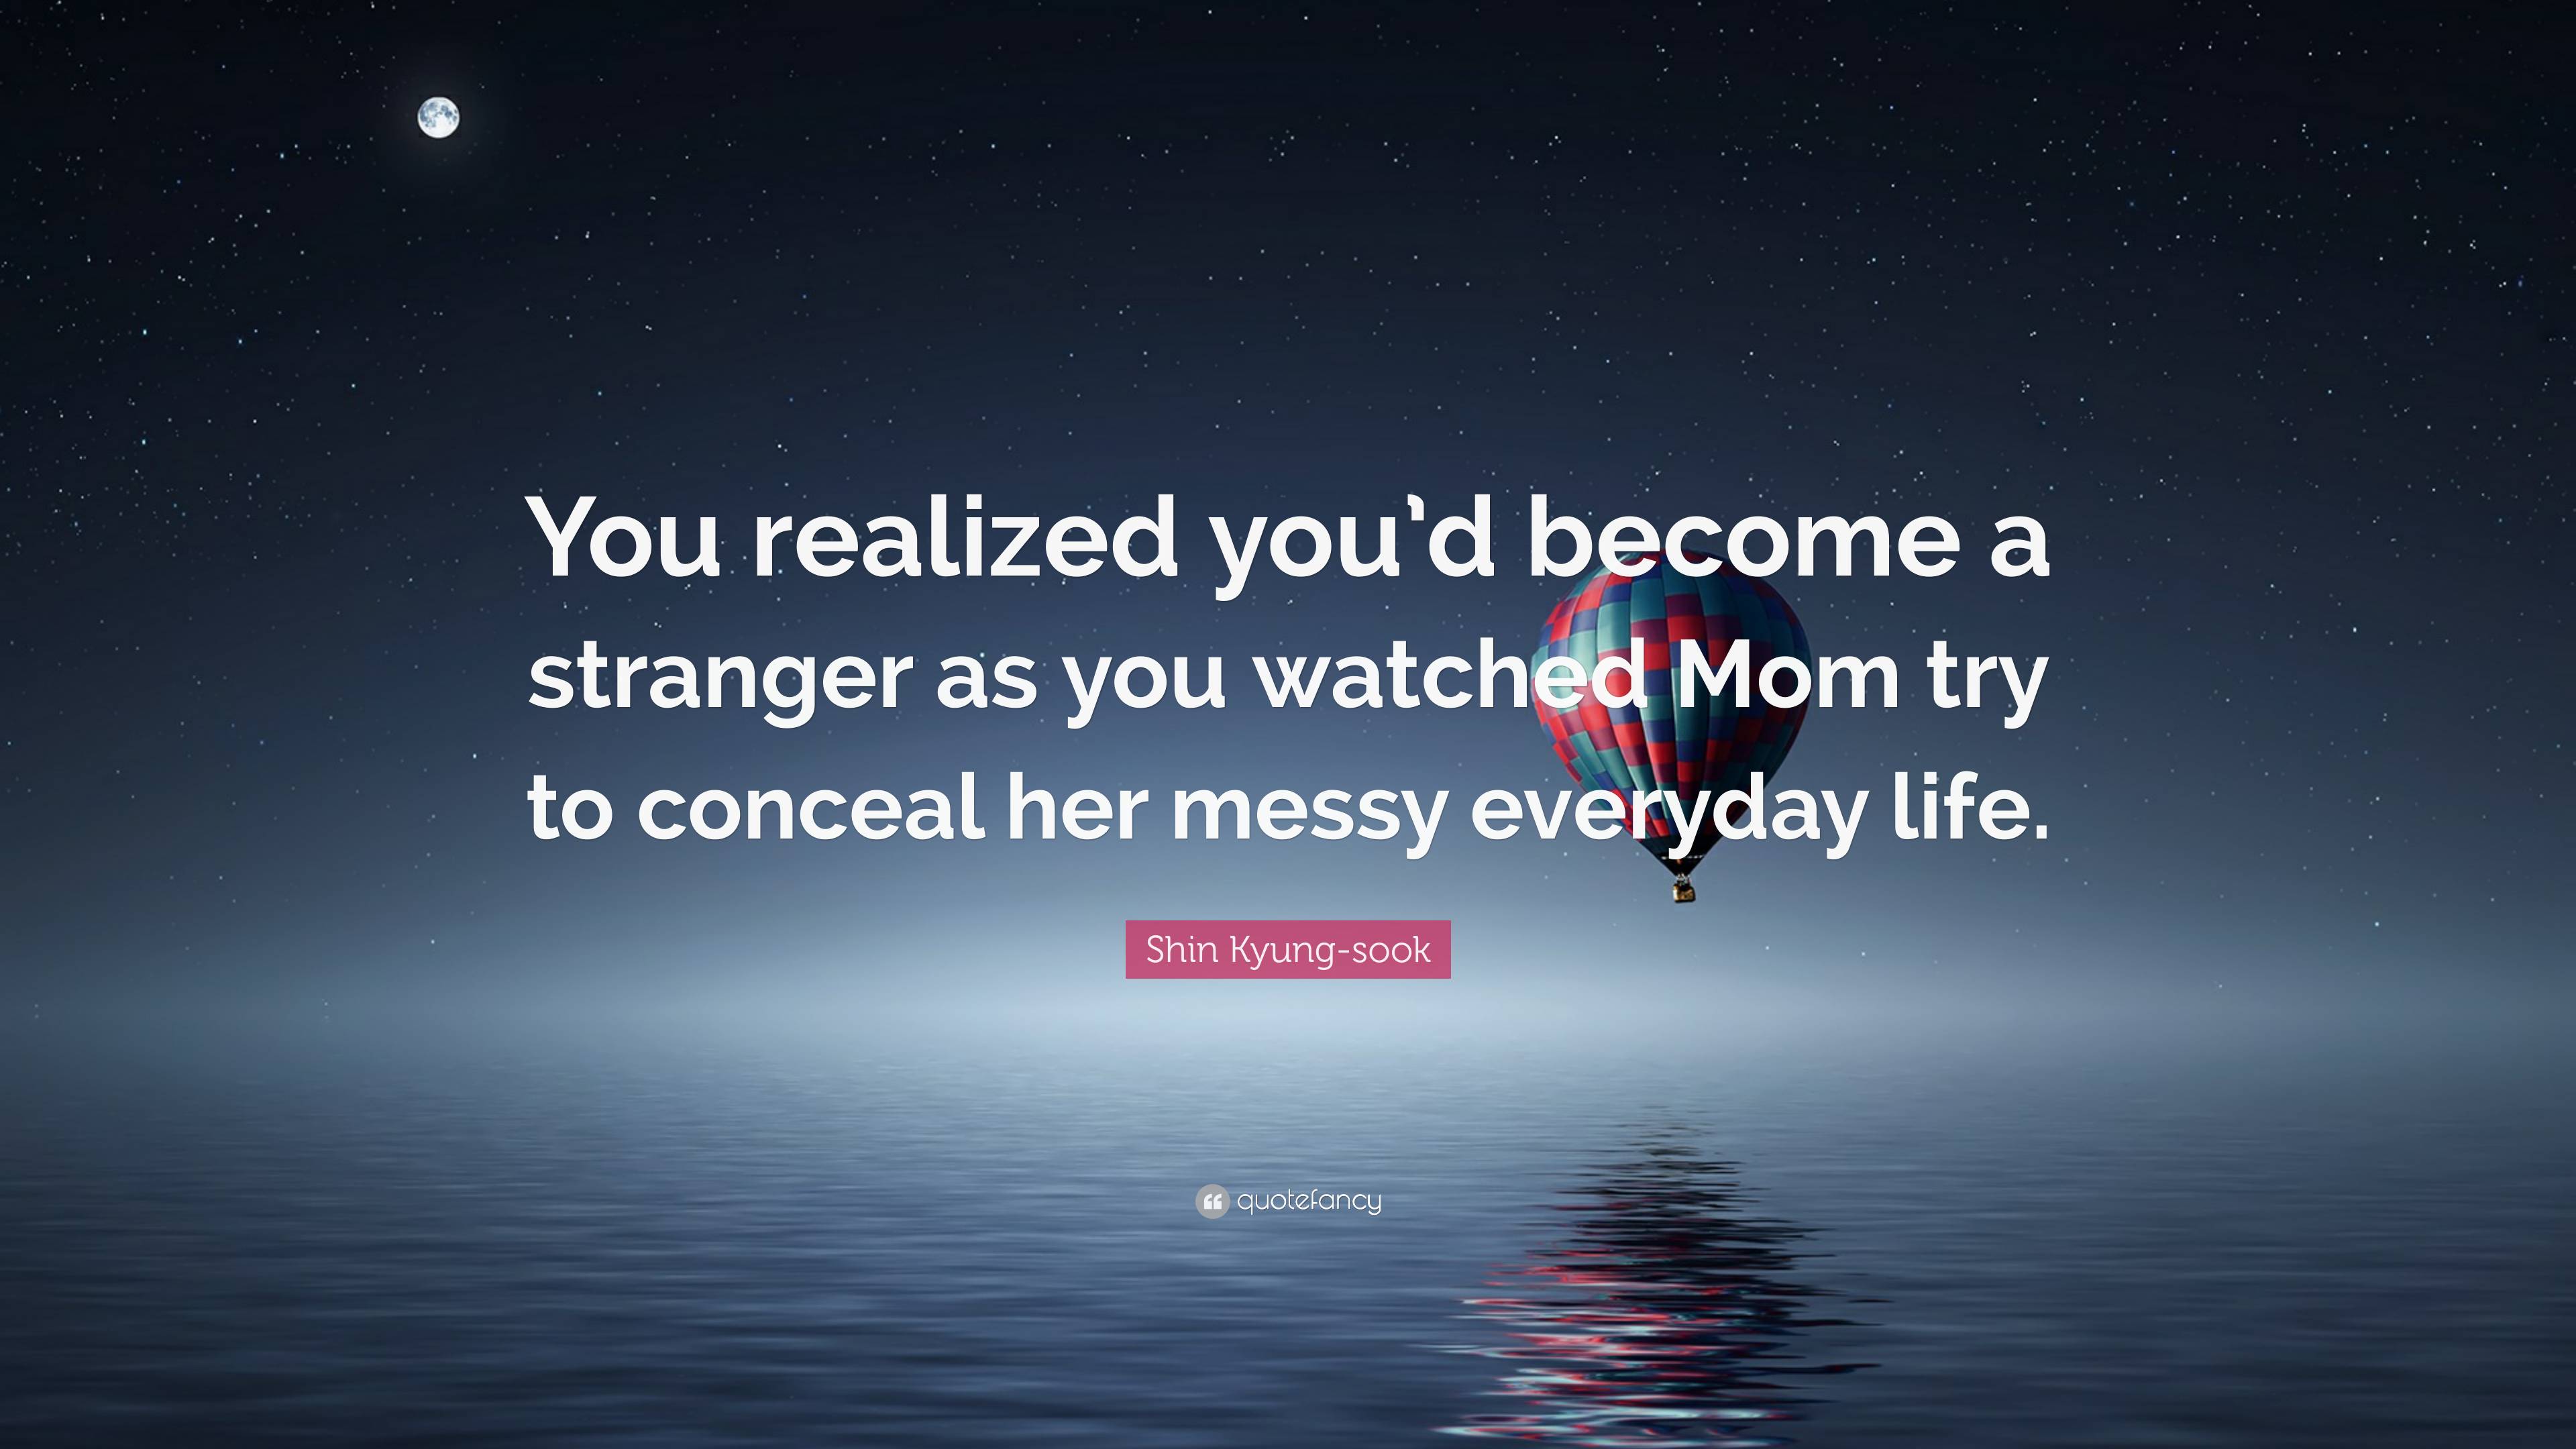 Shin Kyung-sook Quote: “You realized you'd become a stranger as you watched  Mom try